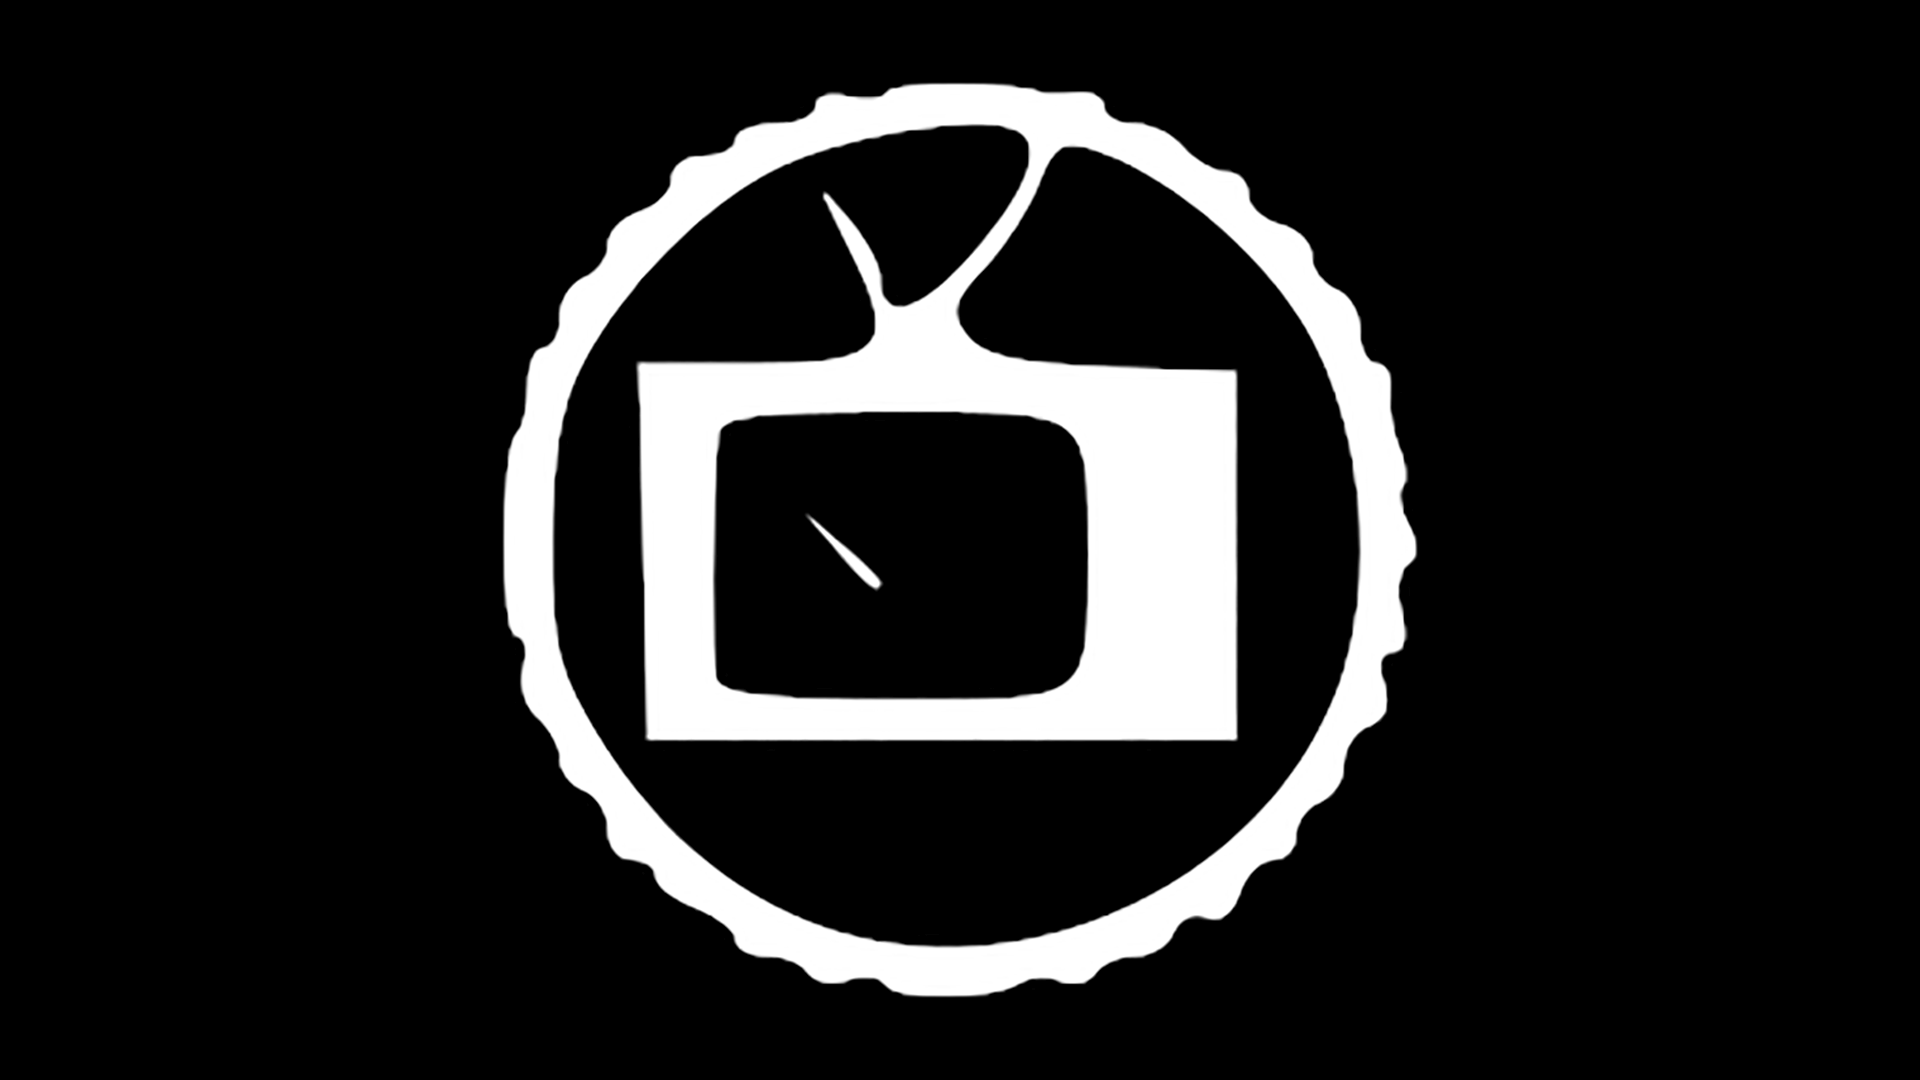 Icon for Too much television is bad for you